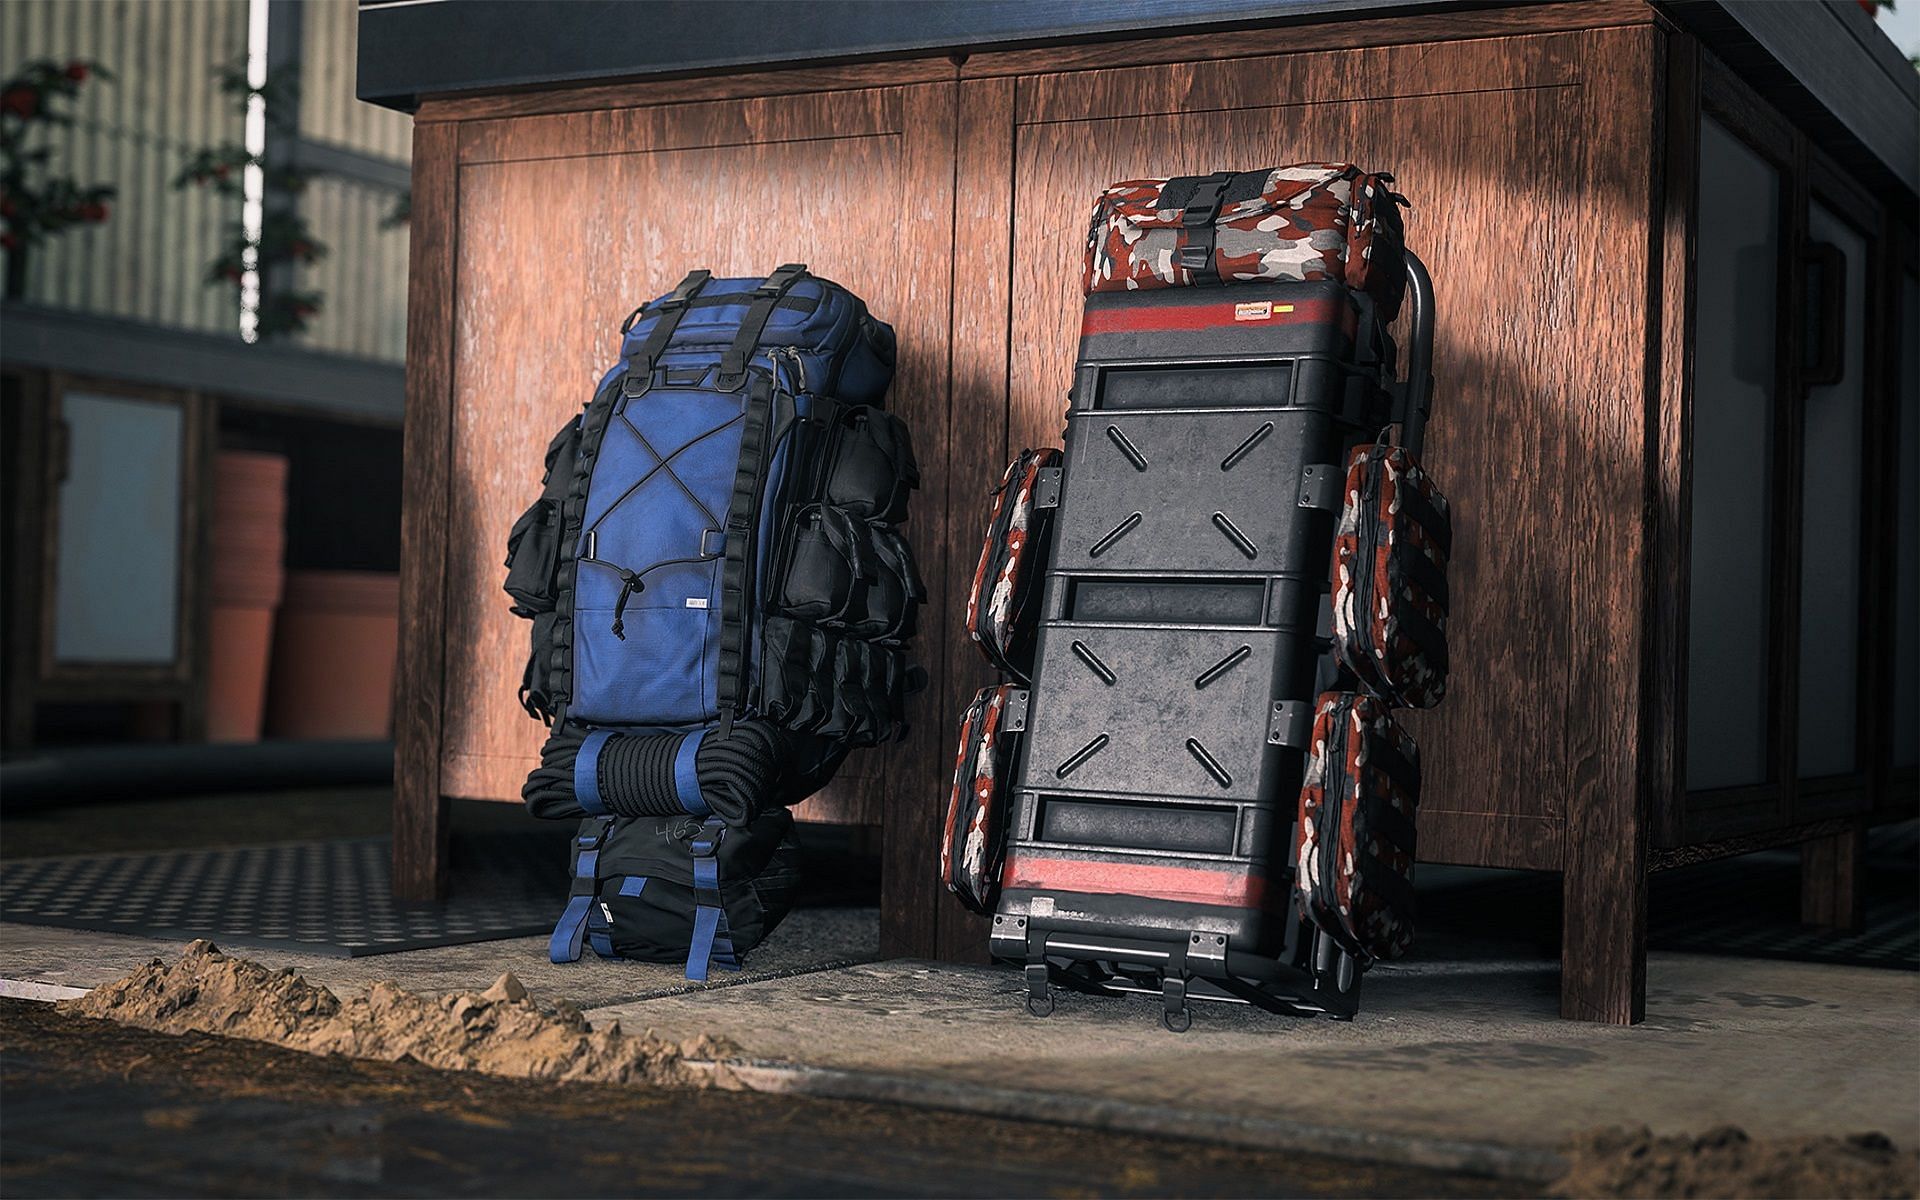 Scavenger and Secure backpacks systems in Warzone 2